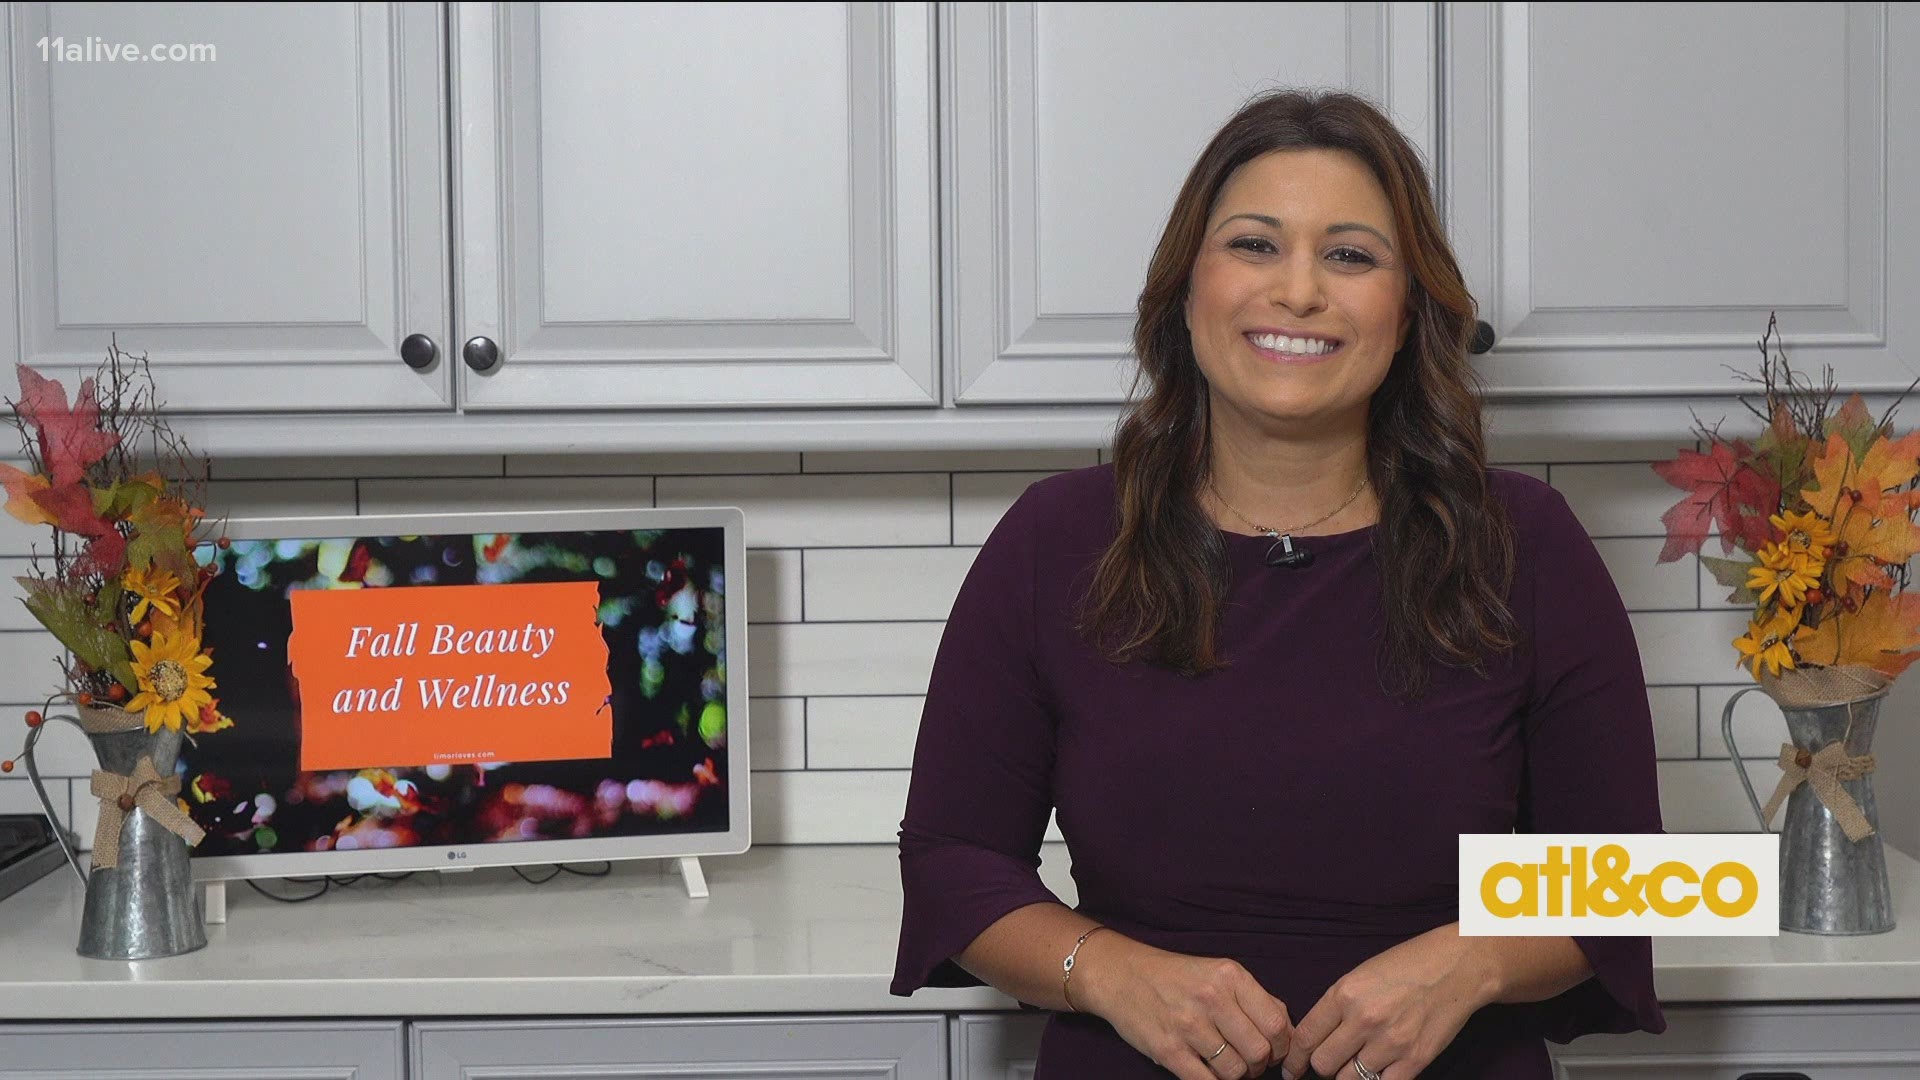 Lifestyle expert Limor Suss shares Fall beauty & wellness essentials to help us look and feel our best: Garnier, Chapstick, BareOrganics, and Lifeway Kefir included.